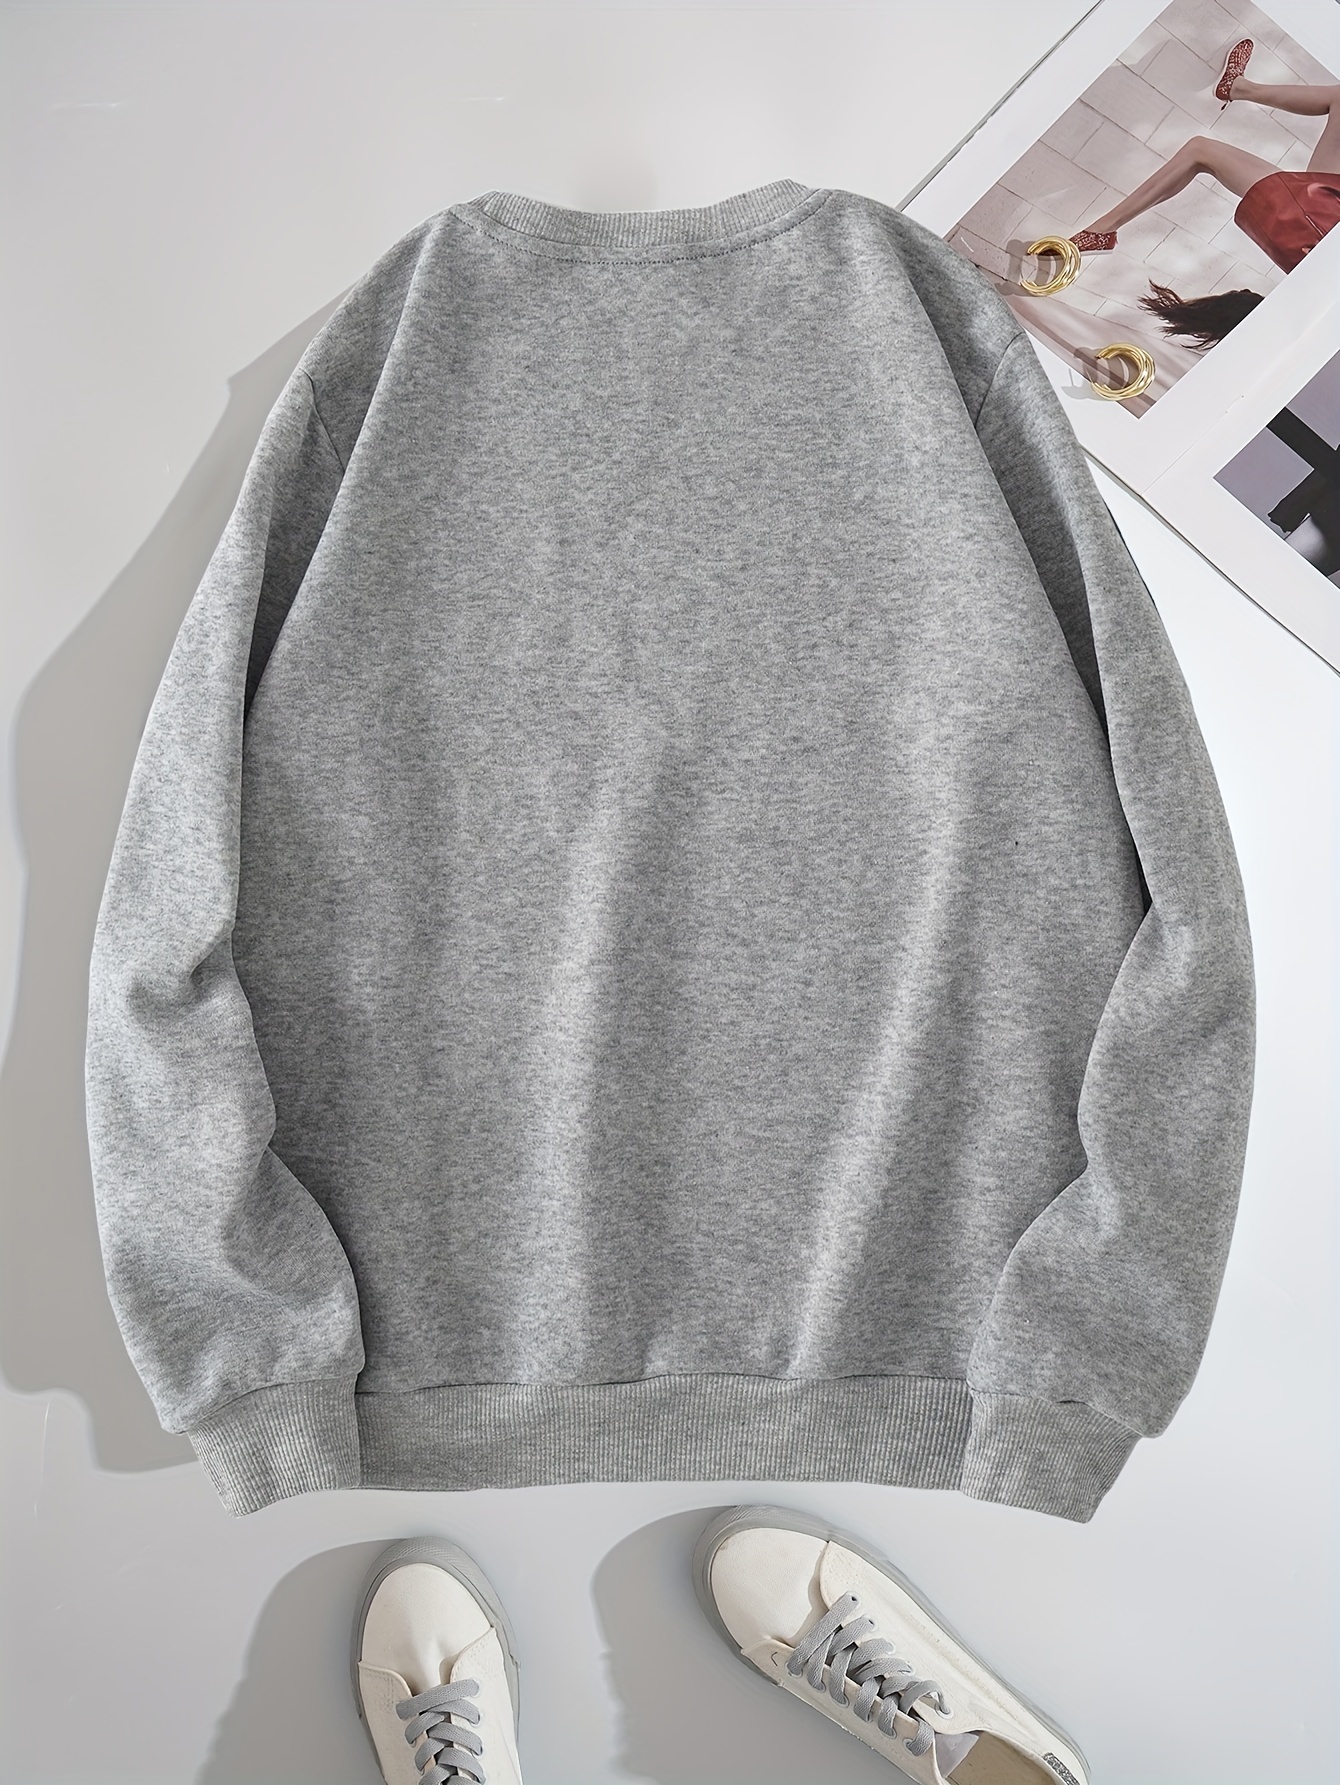 Niuer Ladies Casual Long Sleeve Tops Women Warm Jumpers Plush Sport Solid  Color Cozy Pullover Gray L 